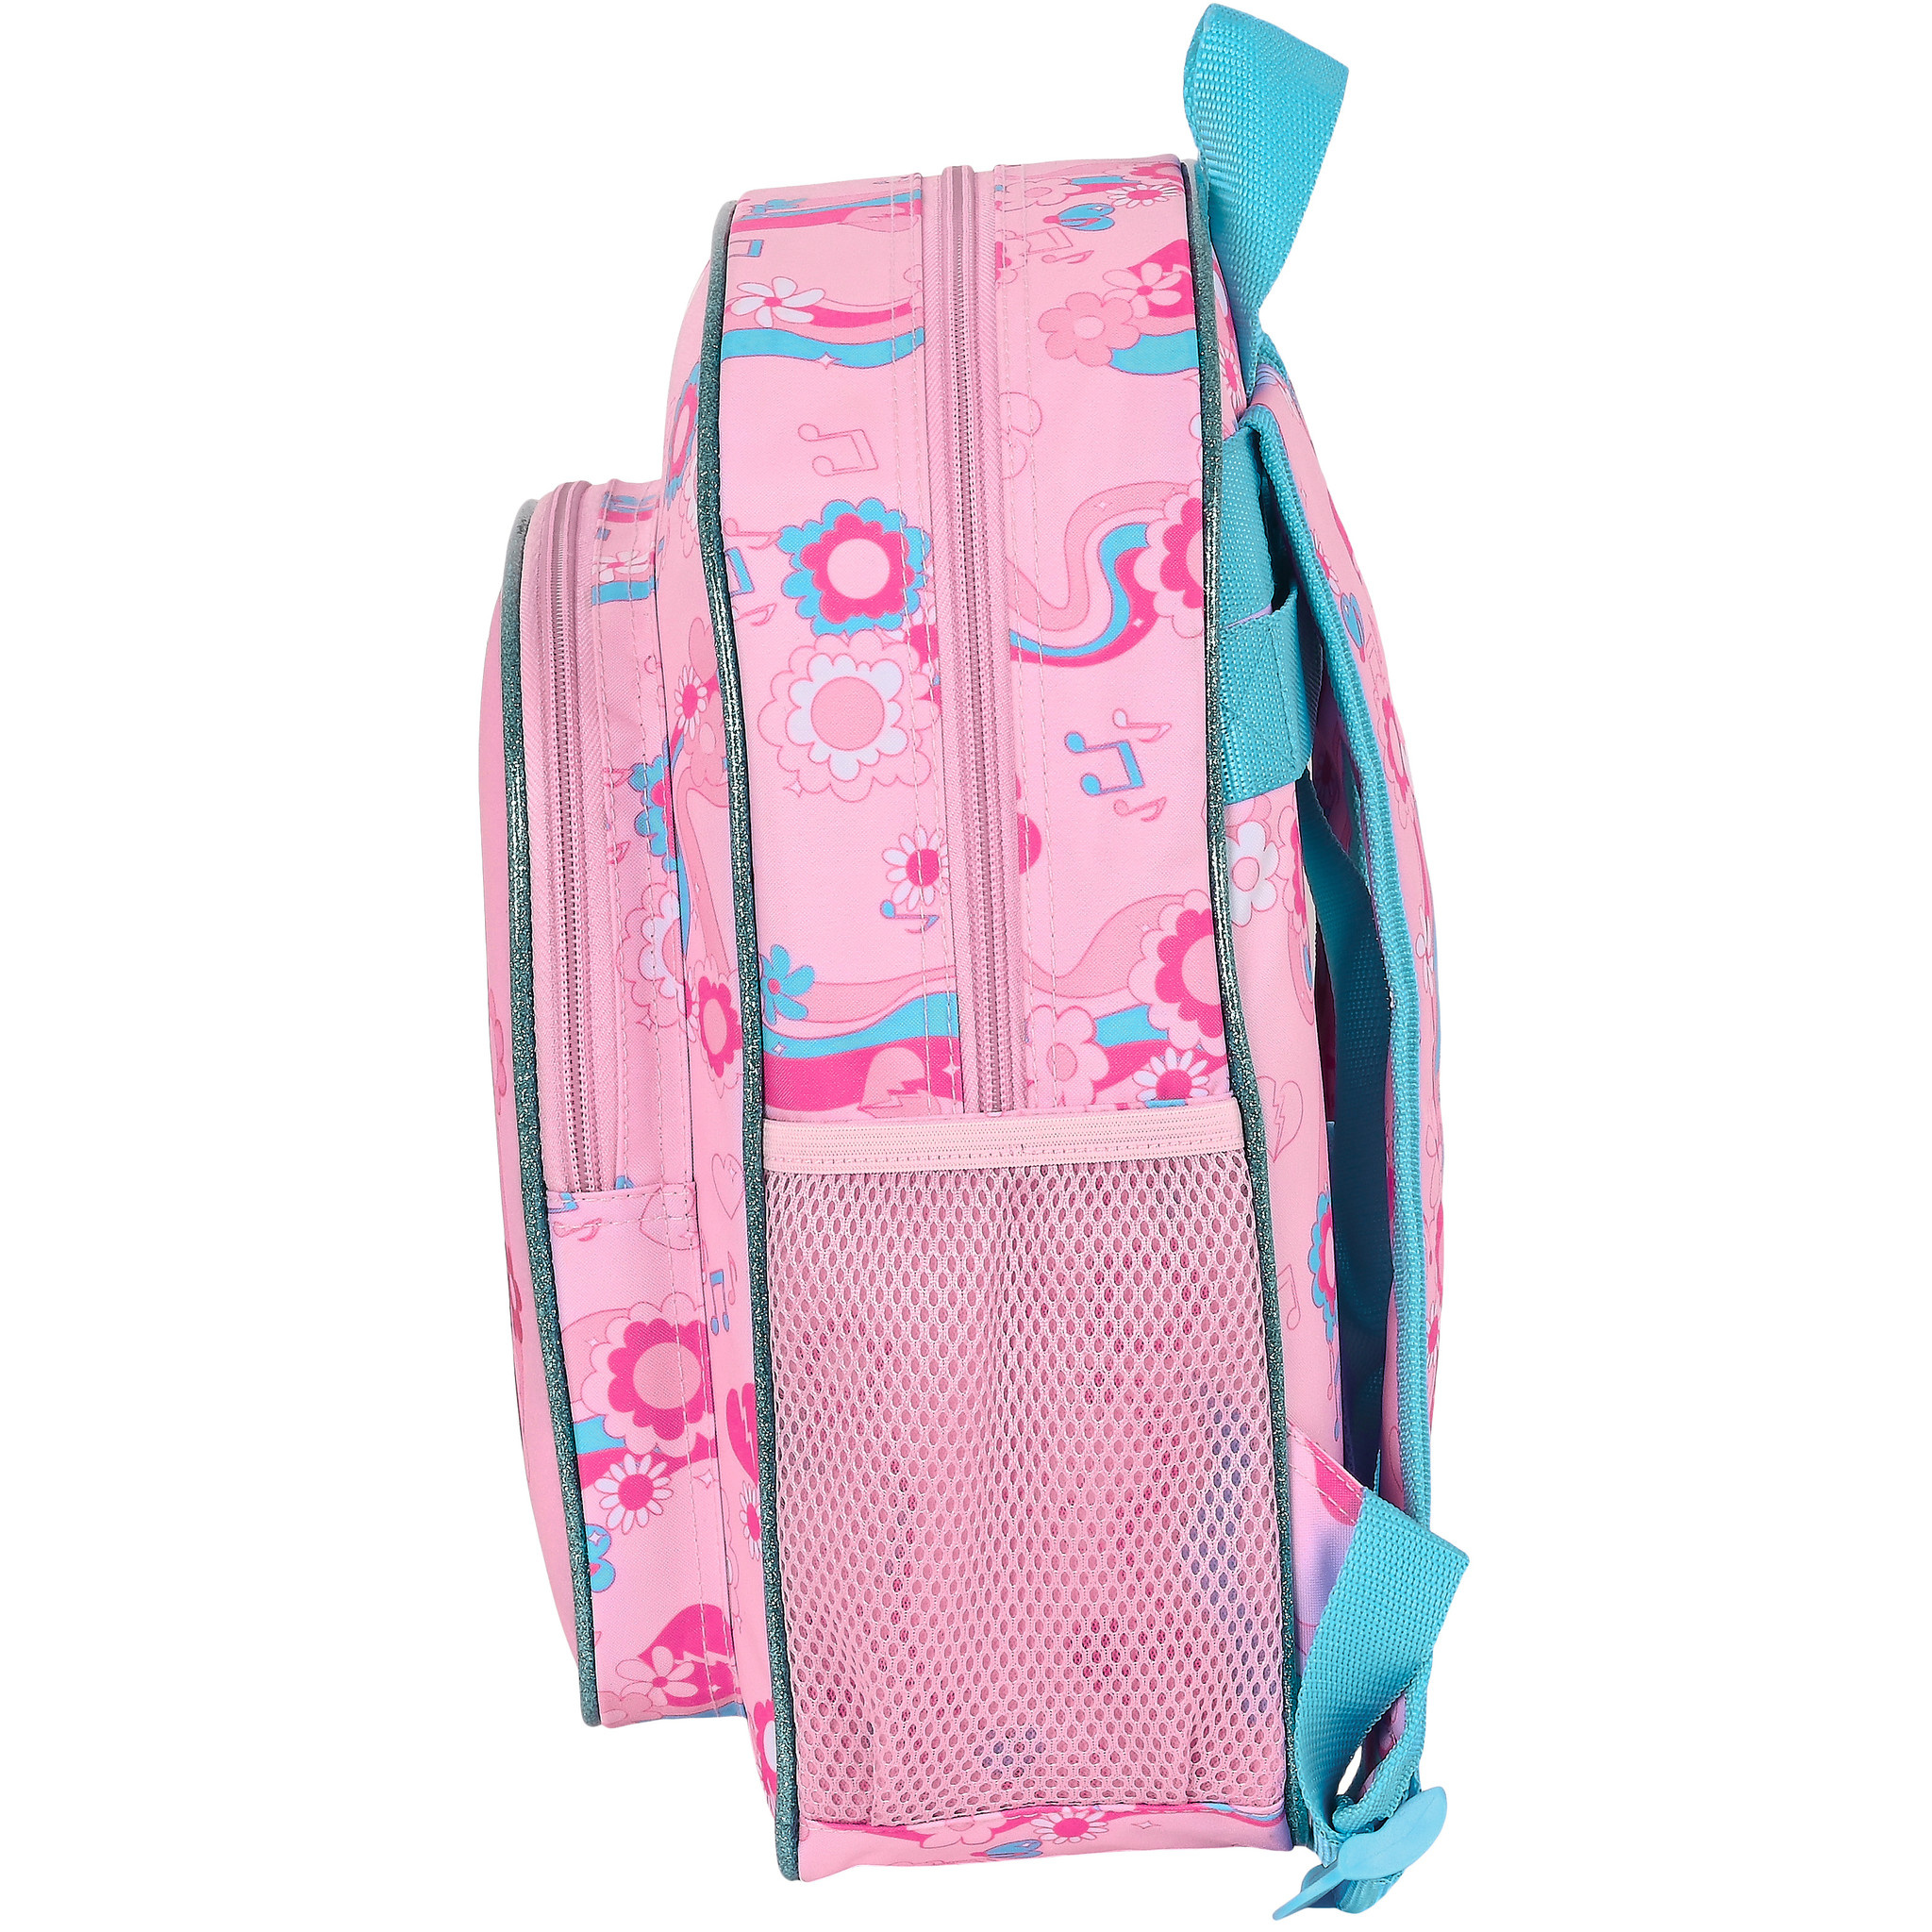 L.O.L. Surprise Backpack, Glow Girls - 34 x 28 x 10 cm - Polyester